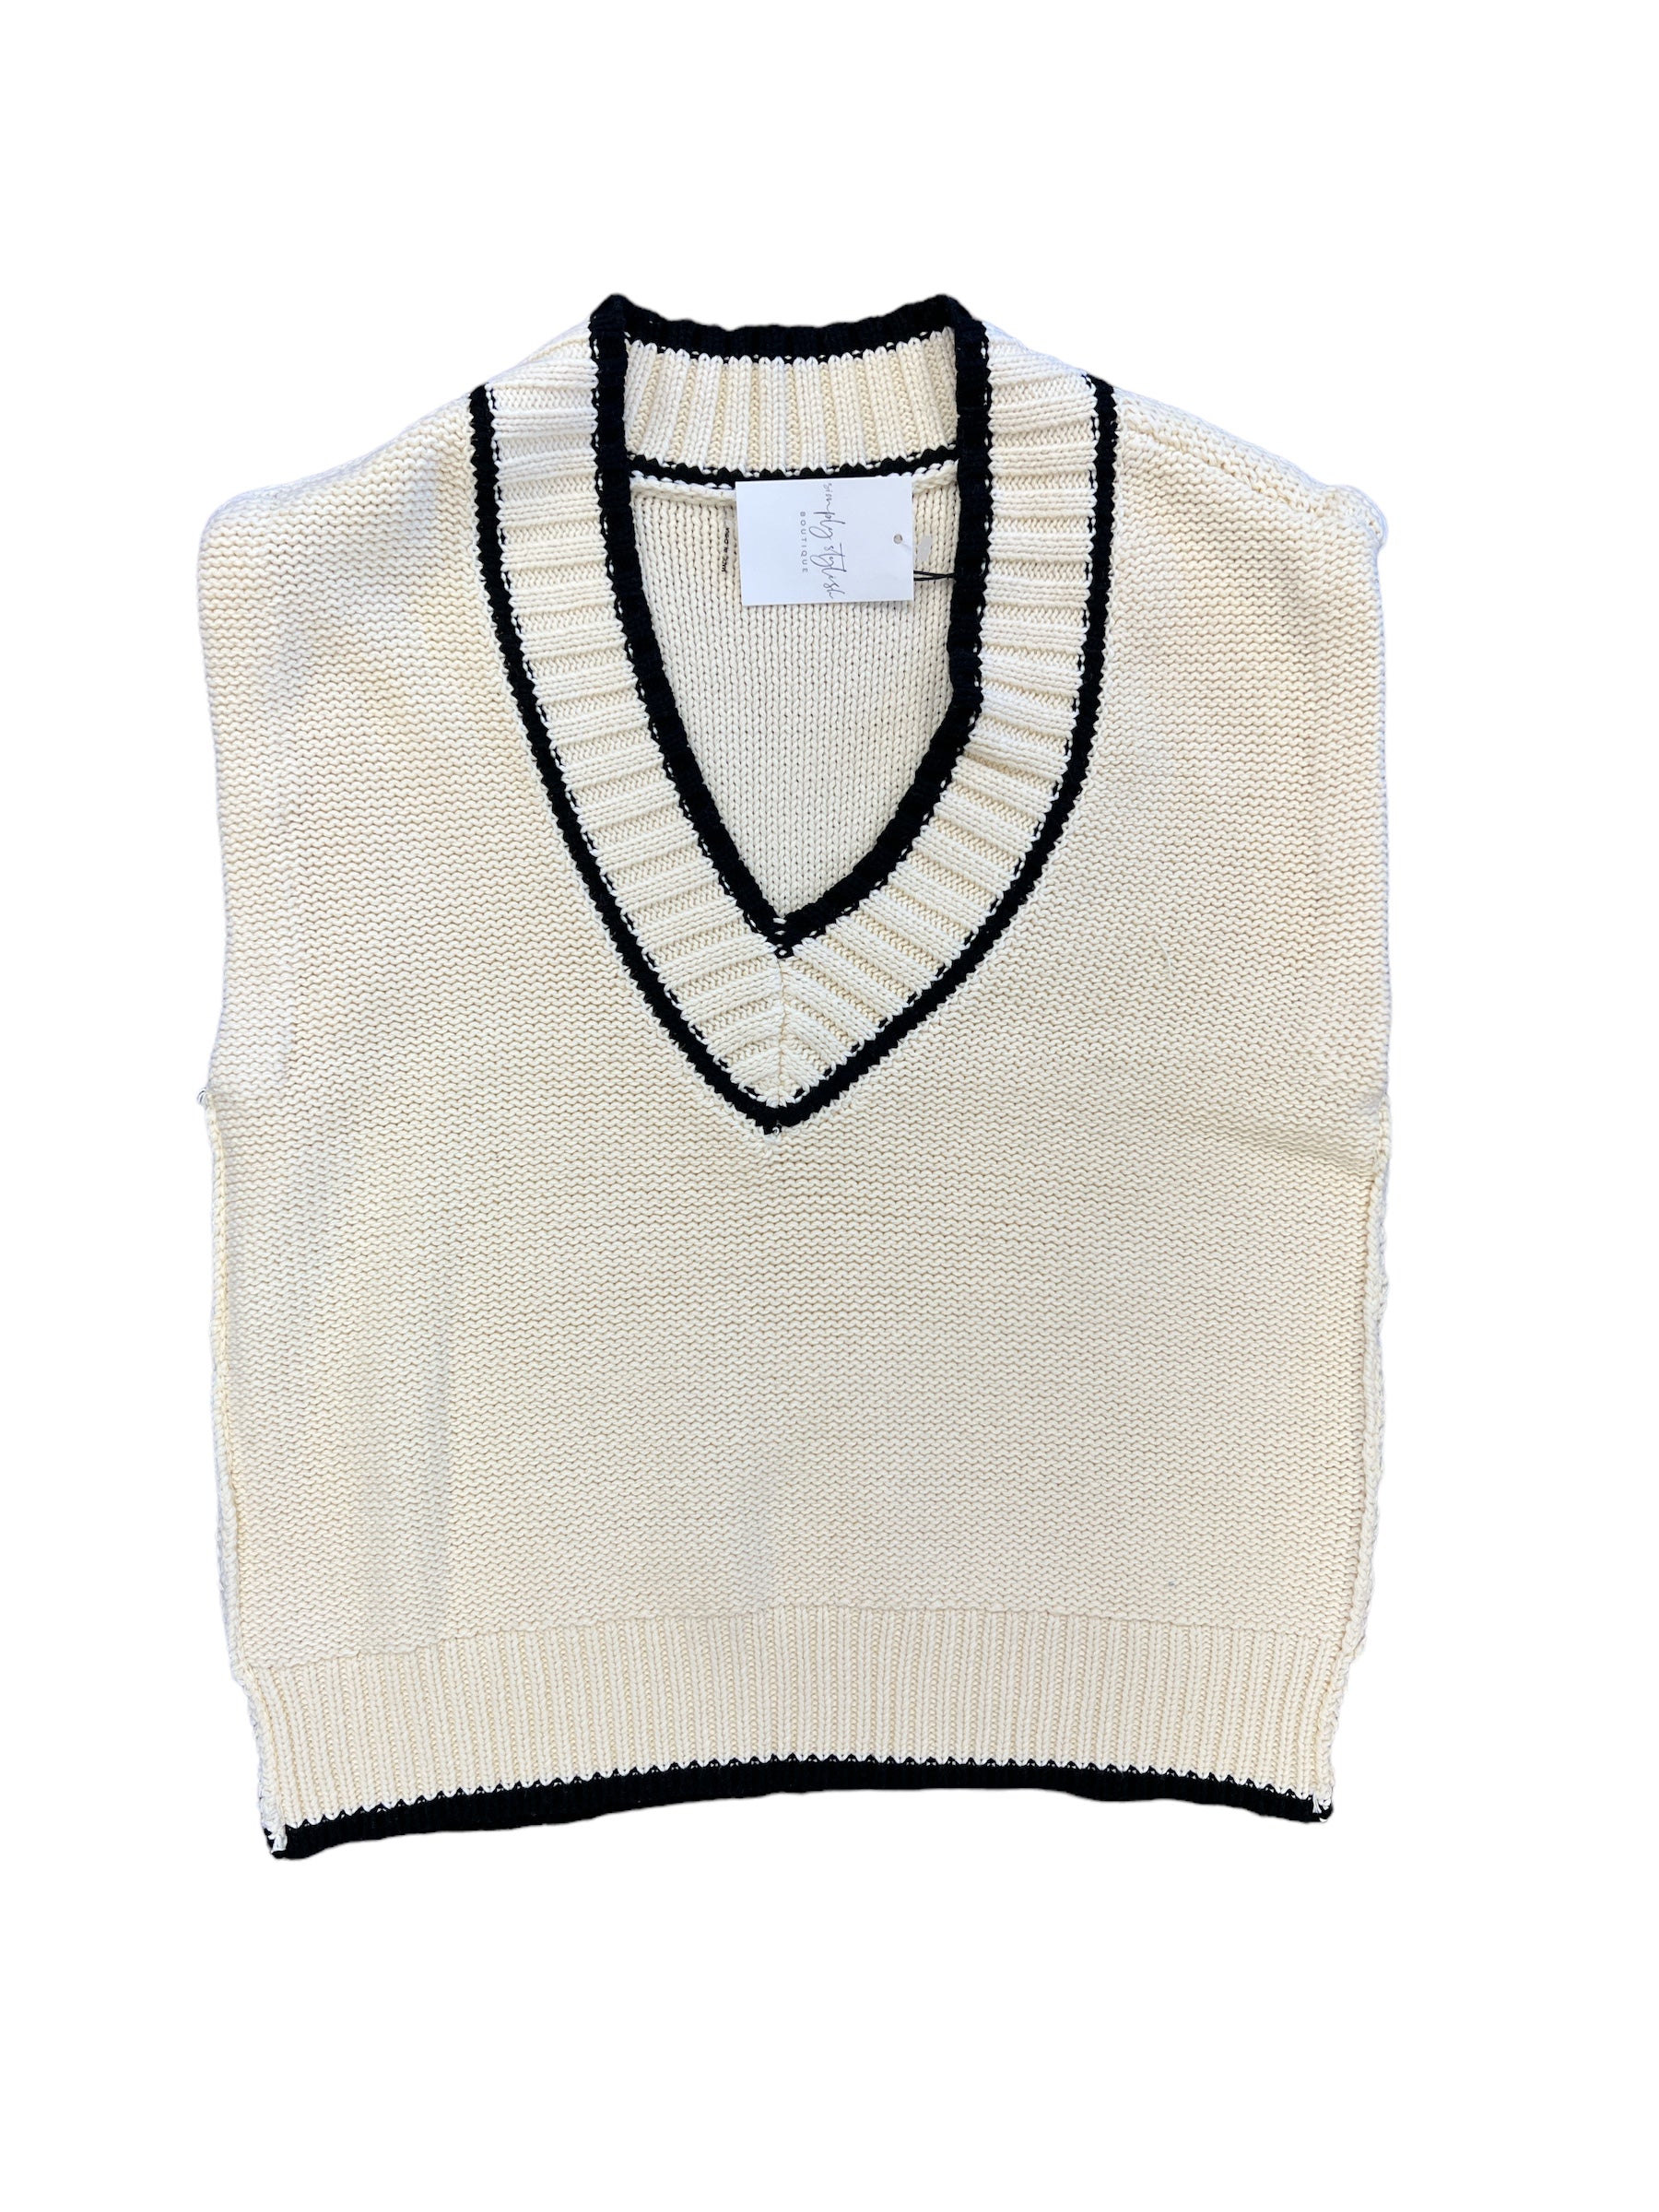 Kinsley Sweater Vest-140 Sweaters, Cardigans & Sweatshirts-Simply Stylish Boutique-Simply Stylish Boutique | Women’s & Kid’s Fashion | Paducah, KY